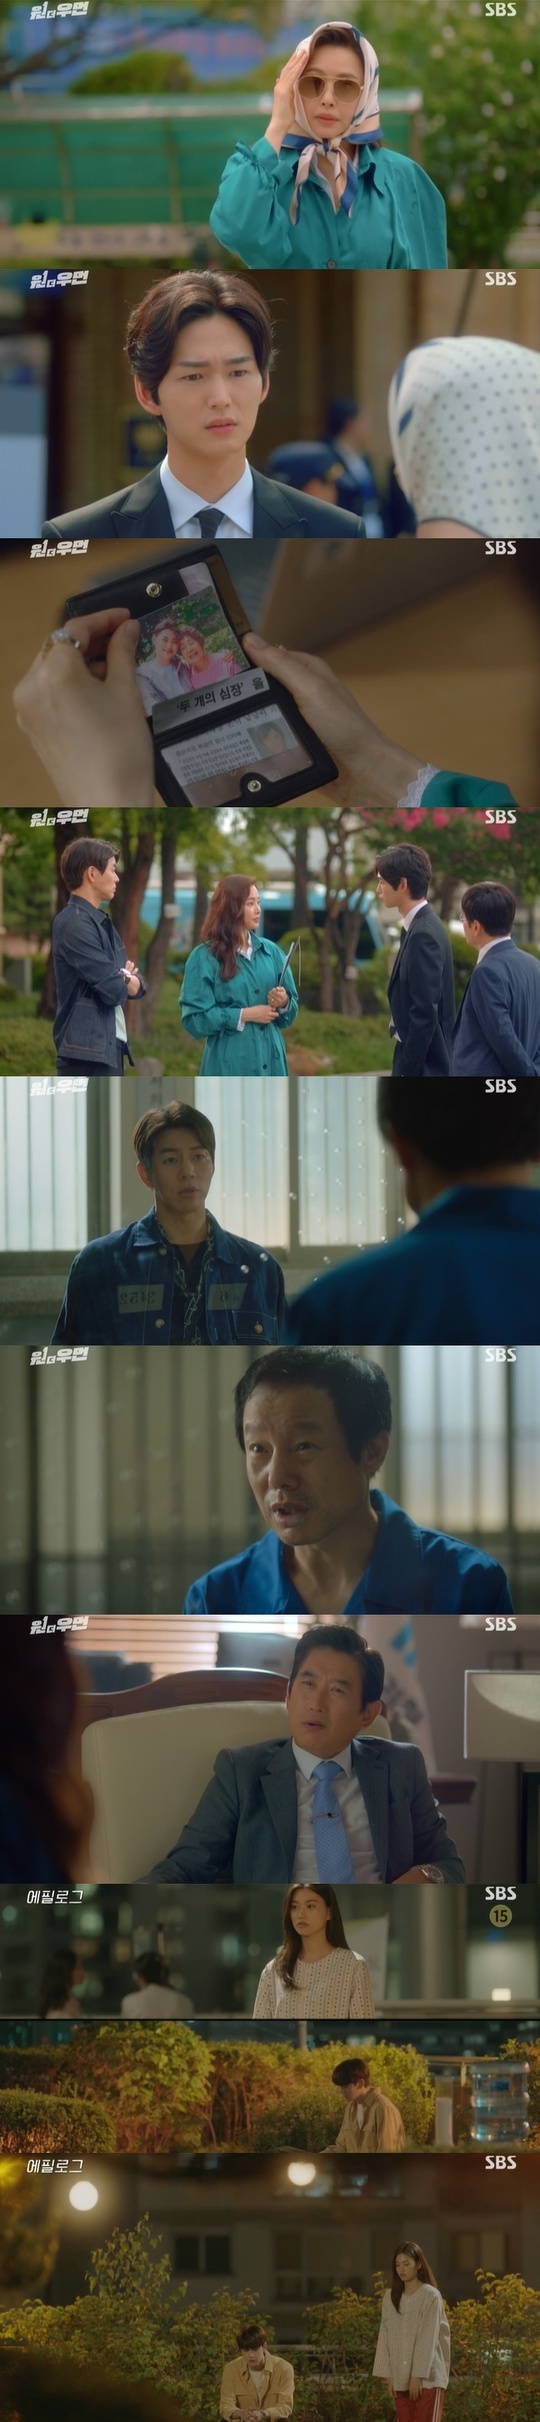 Lee Ha-nui has found his real identity thanks to Lee Won-keun, and his past first love of Lee Sang-yoon has also been identified as Lee Ha-nui.In the 7th episode of SBS gilt drama One the Woman (played by Kim Yoon and directed by Choi Young-hoon), which was broadcast on October 8, the figure of the supporting actor (Lee Ha-nui), who learned about his real identity, was portrayed.Cho Yeon-ju noticed the situation abnormality and headed straight to the Seopyeong subdivision with a week security team and a police car behind him.In the end, Cho Yeon-ju appeared more loudly than anyone else who should not be seen.And Ahn Yoo-joon (Lee Won-keun), who was in the meeting, welcomed her as soon as she found the supporting actor, saying, Sister, I thought something bad happened.Cho Yeon-ju asked Ahn Yoo-joon, who seemed to know him, wondering, Do you know me?After that, Ahn Yoo-joon informed the supporting actor, I know you were a supporting actor, a central prosecutor.The supporting actor then cheered on the ID card given by Ahn Yoo-joon, saying, So I am not a prosecutor, but a real prosecutor, not a fraud.Ahn Yoo-joon noticed all the situations in which the supporting actor lost his memory and was posing as a Kang Mi-na.I want to know what its like. Onea never had a sister on my side. Ive always been on her side.What can I do to help? An Yoo-joon joined the supporting actors side with a memorandum of intent to pay damages when he announced his identity.The car that the supporting actor came in was quickly scrapped by one week and the brake defect could not be proved.The supporting actor said, If I find out that I am not Kang Mina, the real Kang Mina will become dangerous.I dont think its time to go back, but I dont think its time to go back.Ahn Yoo-joon took the supporting actor to the house of the supporting actor Onee, and the supporting actor was surprised that his house was right next door to the Hansung-book.Ahn Yoo-joon, Cho Yeon-ju, and Han Seung-wook were reunited in front of the house, and the supporting actor heard about his grandmother and raised his real identity more.The supporting actor, who later returned home, suspected both the Brake breakdown and the related family as the criminal.Kim Isa (Kim Kyung-shin, Je Su-jeong), who appeared just in time, said, There is no CCTV in the parking lot due to the privacy problem of han seung-wook (Song One Seok), and said, It will be difficult to catch the criminal.I do not think it is normal, but I do not know that I am dangerous, so why are you here? Cho Yeon-ju asked Kim who was on this side, and Kim gave a meaningful answer, It is not just my side in the world.Cho Yeon-ju also connected with Wang Pil-gyu (Lee Kyu-bok) and Choi Dae-chi (Jo Dal-hwan), so he learned that his father Kang Myung-guk (Jung In-ki) was a gangster and that he was currently in prison.He was also bribed by the suspect and was taking private revenge. Cho Yeon-ju came to think he was a just man.At the same time, he was meeting Kang Myung-kook. Han Seung-wook revealed to Kang Myung-kook that he was the son of Han Kang-sik and said, He is the son of the man who killed him by arson murder.I wanted to hear about it then. Han Seung-wook thought that Kang Myung-kook had been arsonist for a week, and Kang Myung-kook said, I have never seen a week.Who would believe that it was not my fault now? My daughter does not believe me. Kang Myung-guk refused to talk anymore.Cho Yeon-ju, with the help of Ahn Yoo-joon, memorized the details of the Seoul Central District Prosecutors Office and went to work as a prosecutor.On the same day, Ryu Seung-deok (Kim One-hae) was promoted to the chief prosecutor of the Central District Prosecutors Office, but when the supporting actor appeared, prosecutors mumbled that she had not taken a vacation to accuse the prosecution of internal corruption.Ryu Seung-deok also misunderstood Cho Yeon-ju.Ryu Seung-deok worked hard to see what the supporting actor did during his vacation, and the supporting actor replied, I think the report was wrong.Ryu suspected the supporting actor as Lee Bong-sik had said that he had followed him. The supporting actor hurriedly informed him of his leave of absence and disappeared.Ryu Seung-deok said to himself, If you have insulted the prosecution, why are you hiding what you saw? Why are you taking a leave of absence? What is he doing?Meanwhile Cho Yeon-ju also suspected a strange Ryu Seung-deok.The supporting actor faced Lee Bong-sik in a helmet while leaving the central prosecutors office. Lee Bong-sik only noticed that the supporting actor and Kang Mina looked the same.